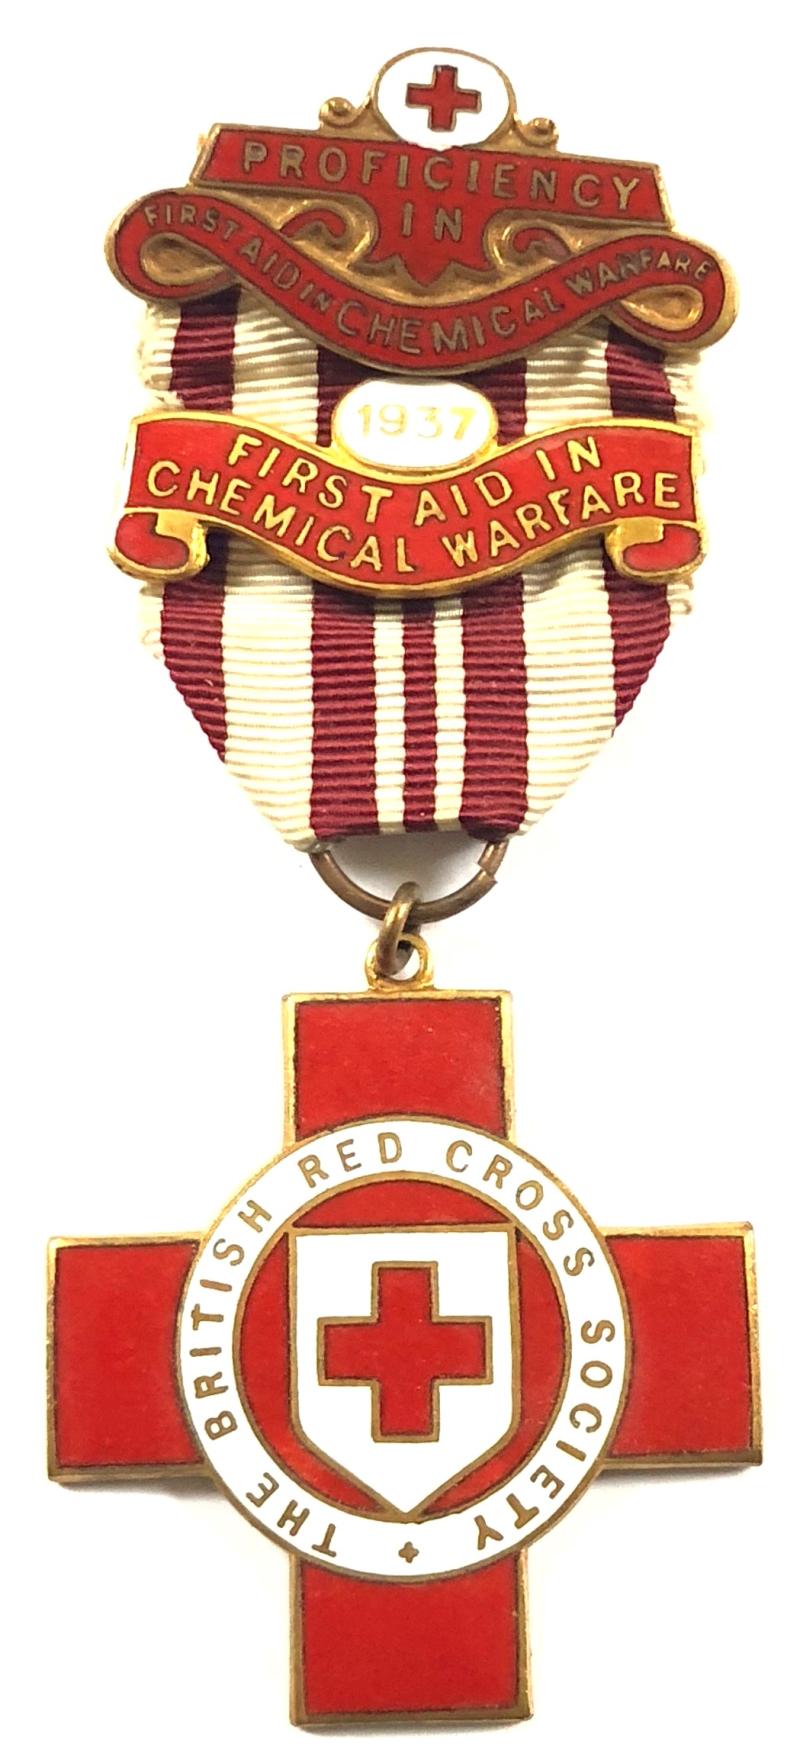 British Red Cross Society Proficiency First Aid Chemical Warfare medal & 1937 clasp N.H.BLAIR